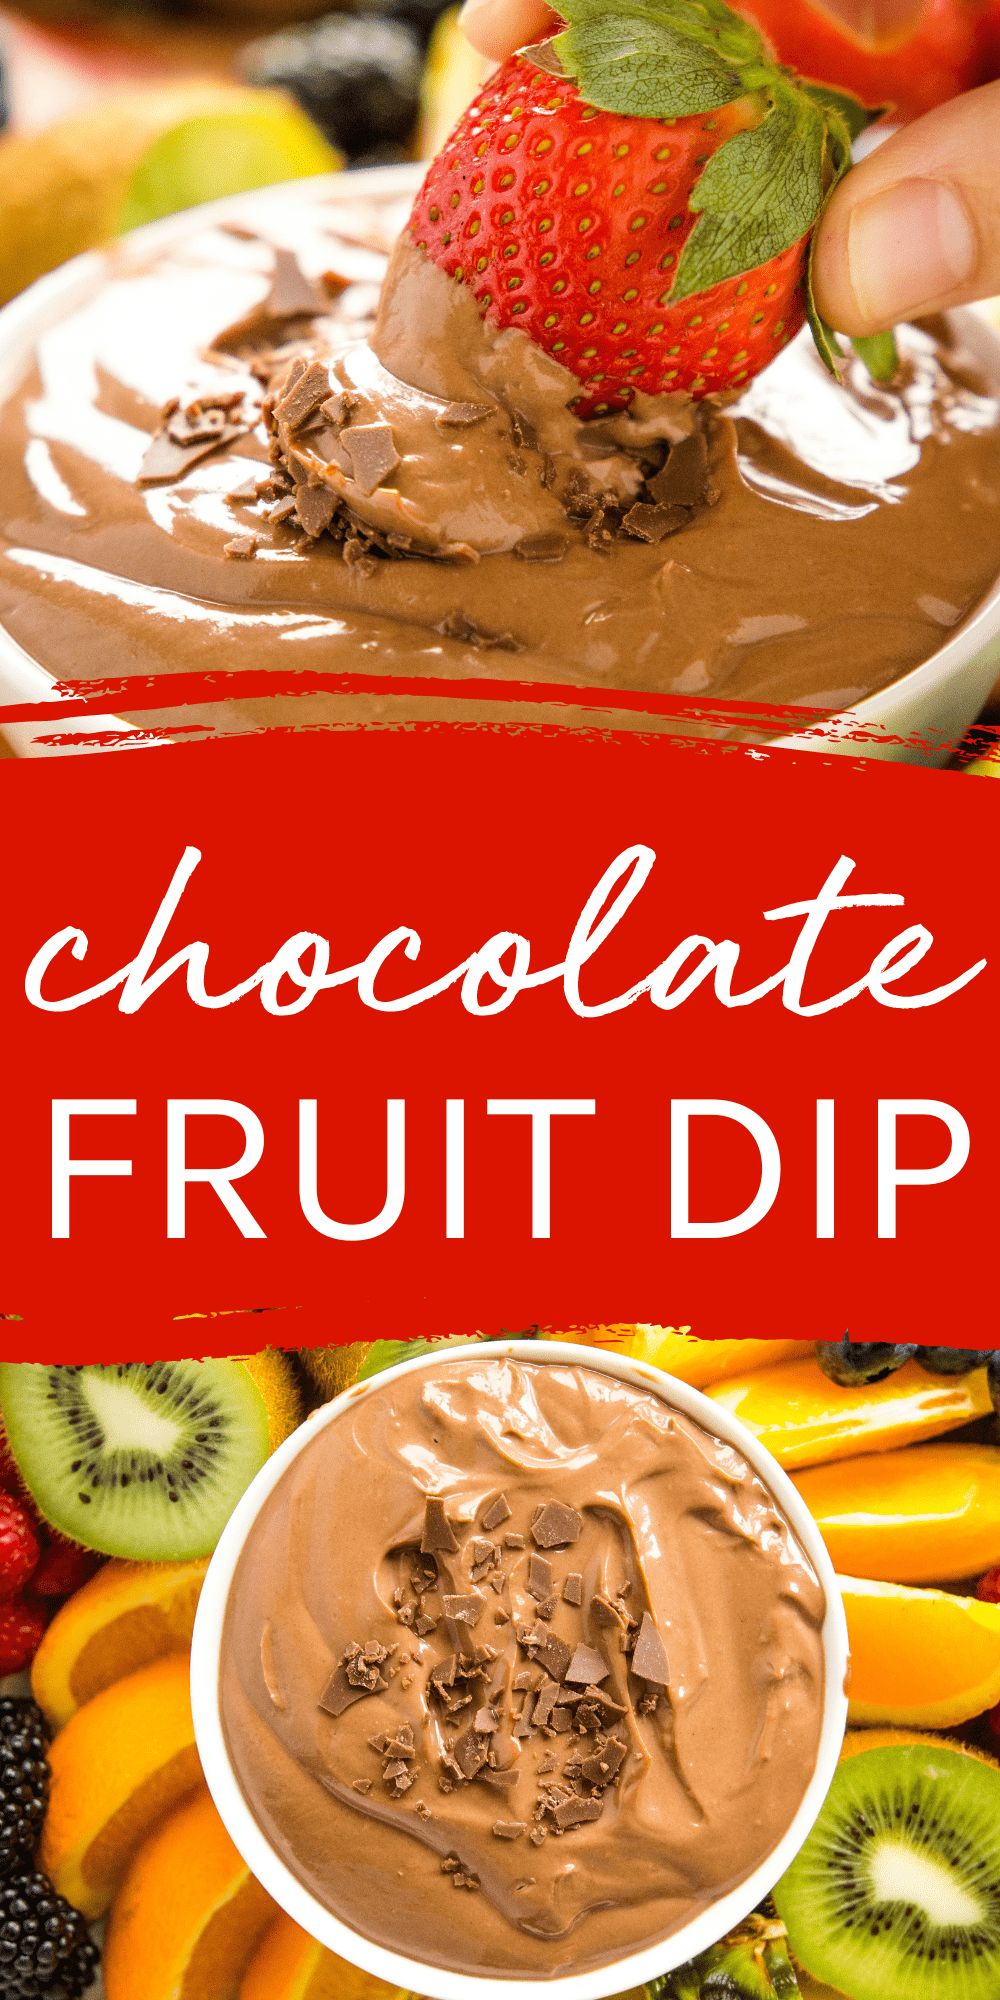 This Chocolate Fruit Dip recipe is the perfect easy dip for fruit platters - smooth, sweet, and easy to make with Greek yogurt. Only 3 ingredients, ready in minutes and under 100 calories per serving. Make this chocolate fruit dip for your next dessert or brunch! Recipe from thebusybaker.ca! #fruitdip #chocolatefruitdip #dessertdip #fruitplatter #easyfruitdip #easydessert via @busybakerblog